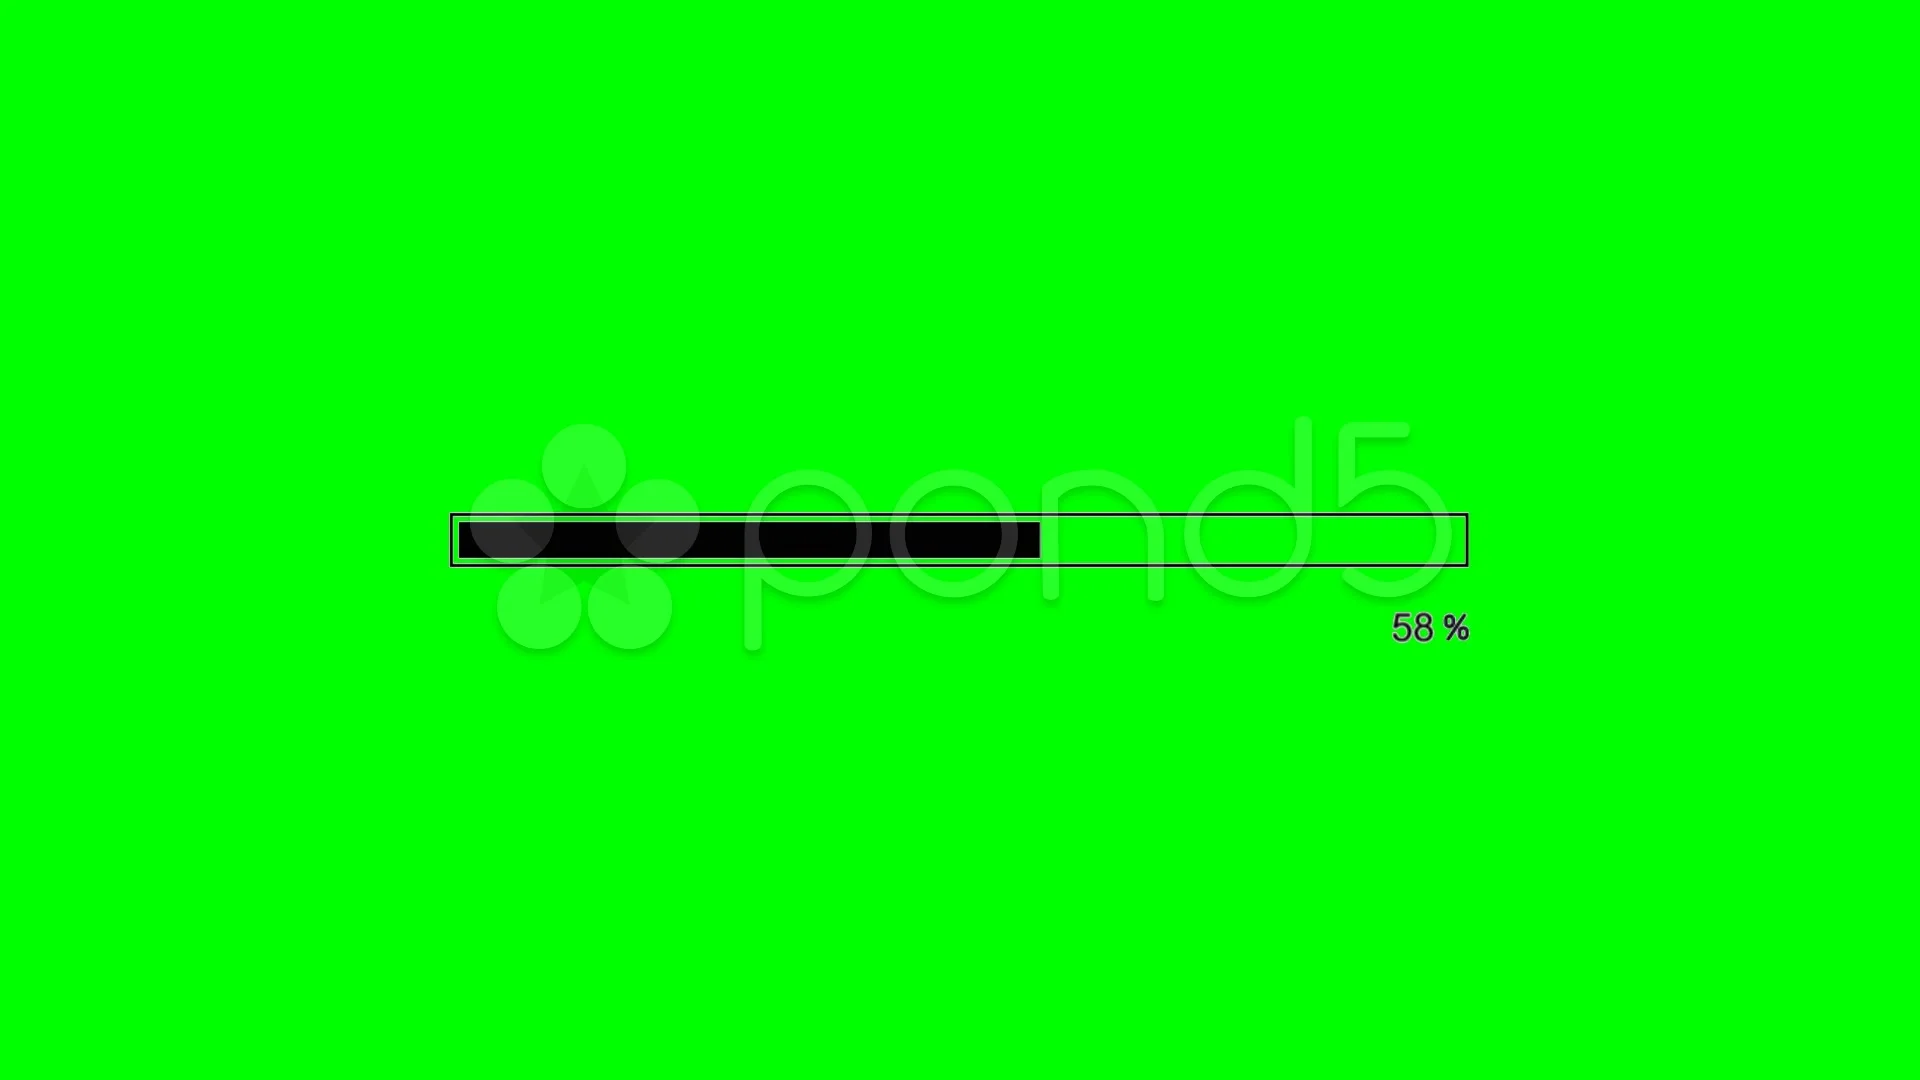 Loading Bar Animations - green screen | Stock Video | Pond5